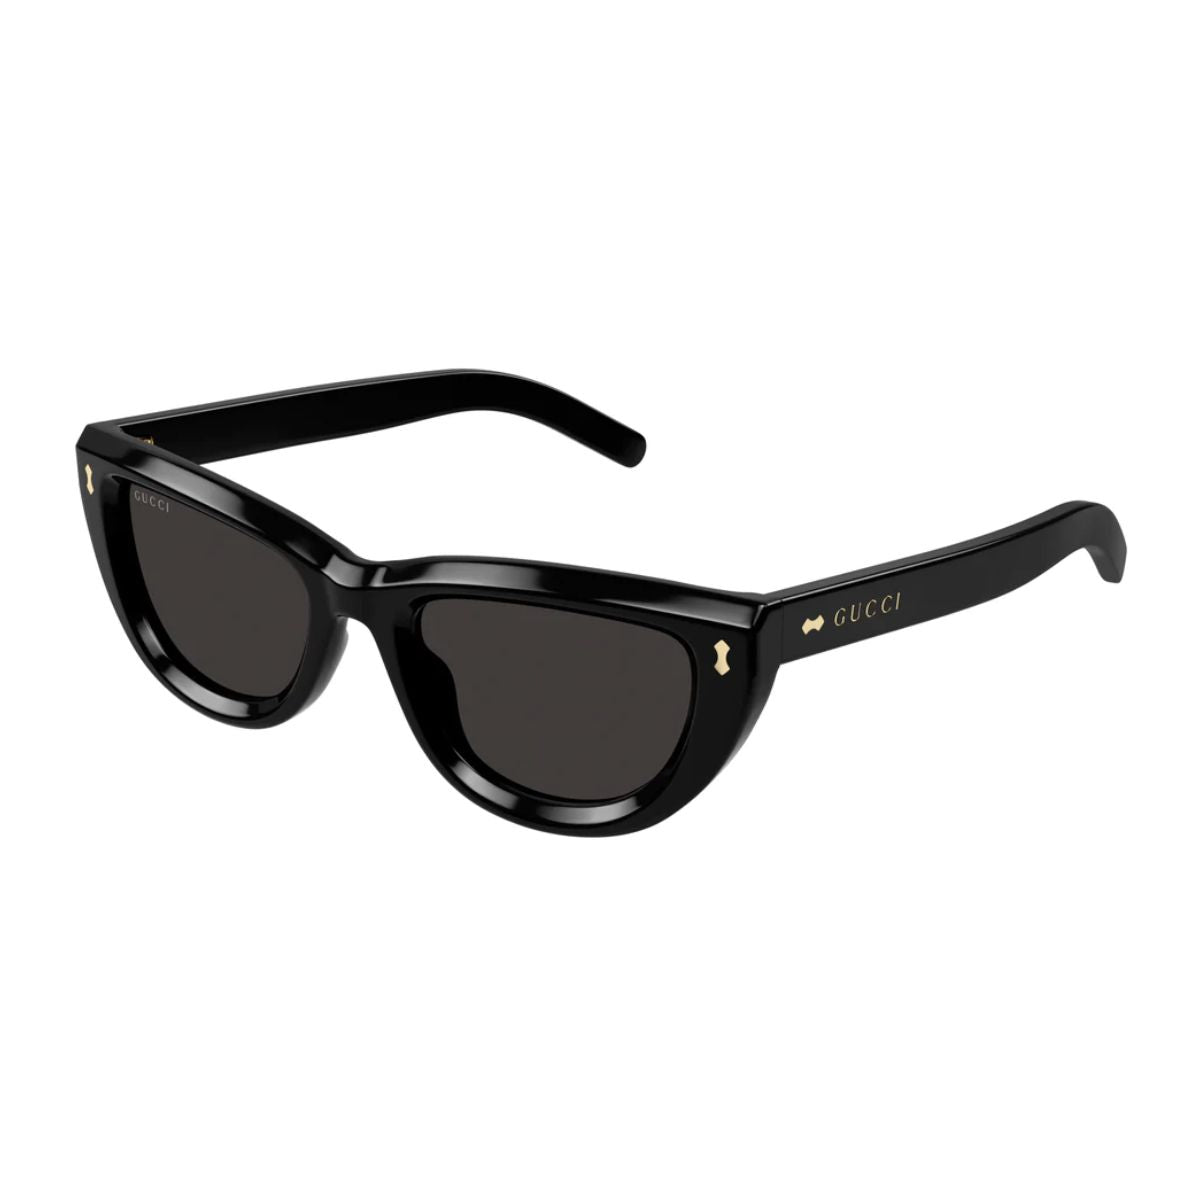 "Gucci 1521S 001 Sunglasses - Elevate Your Look with Optorium"